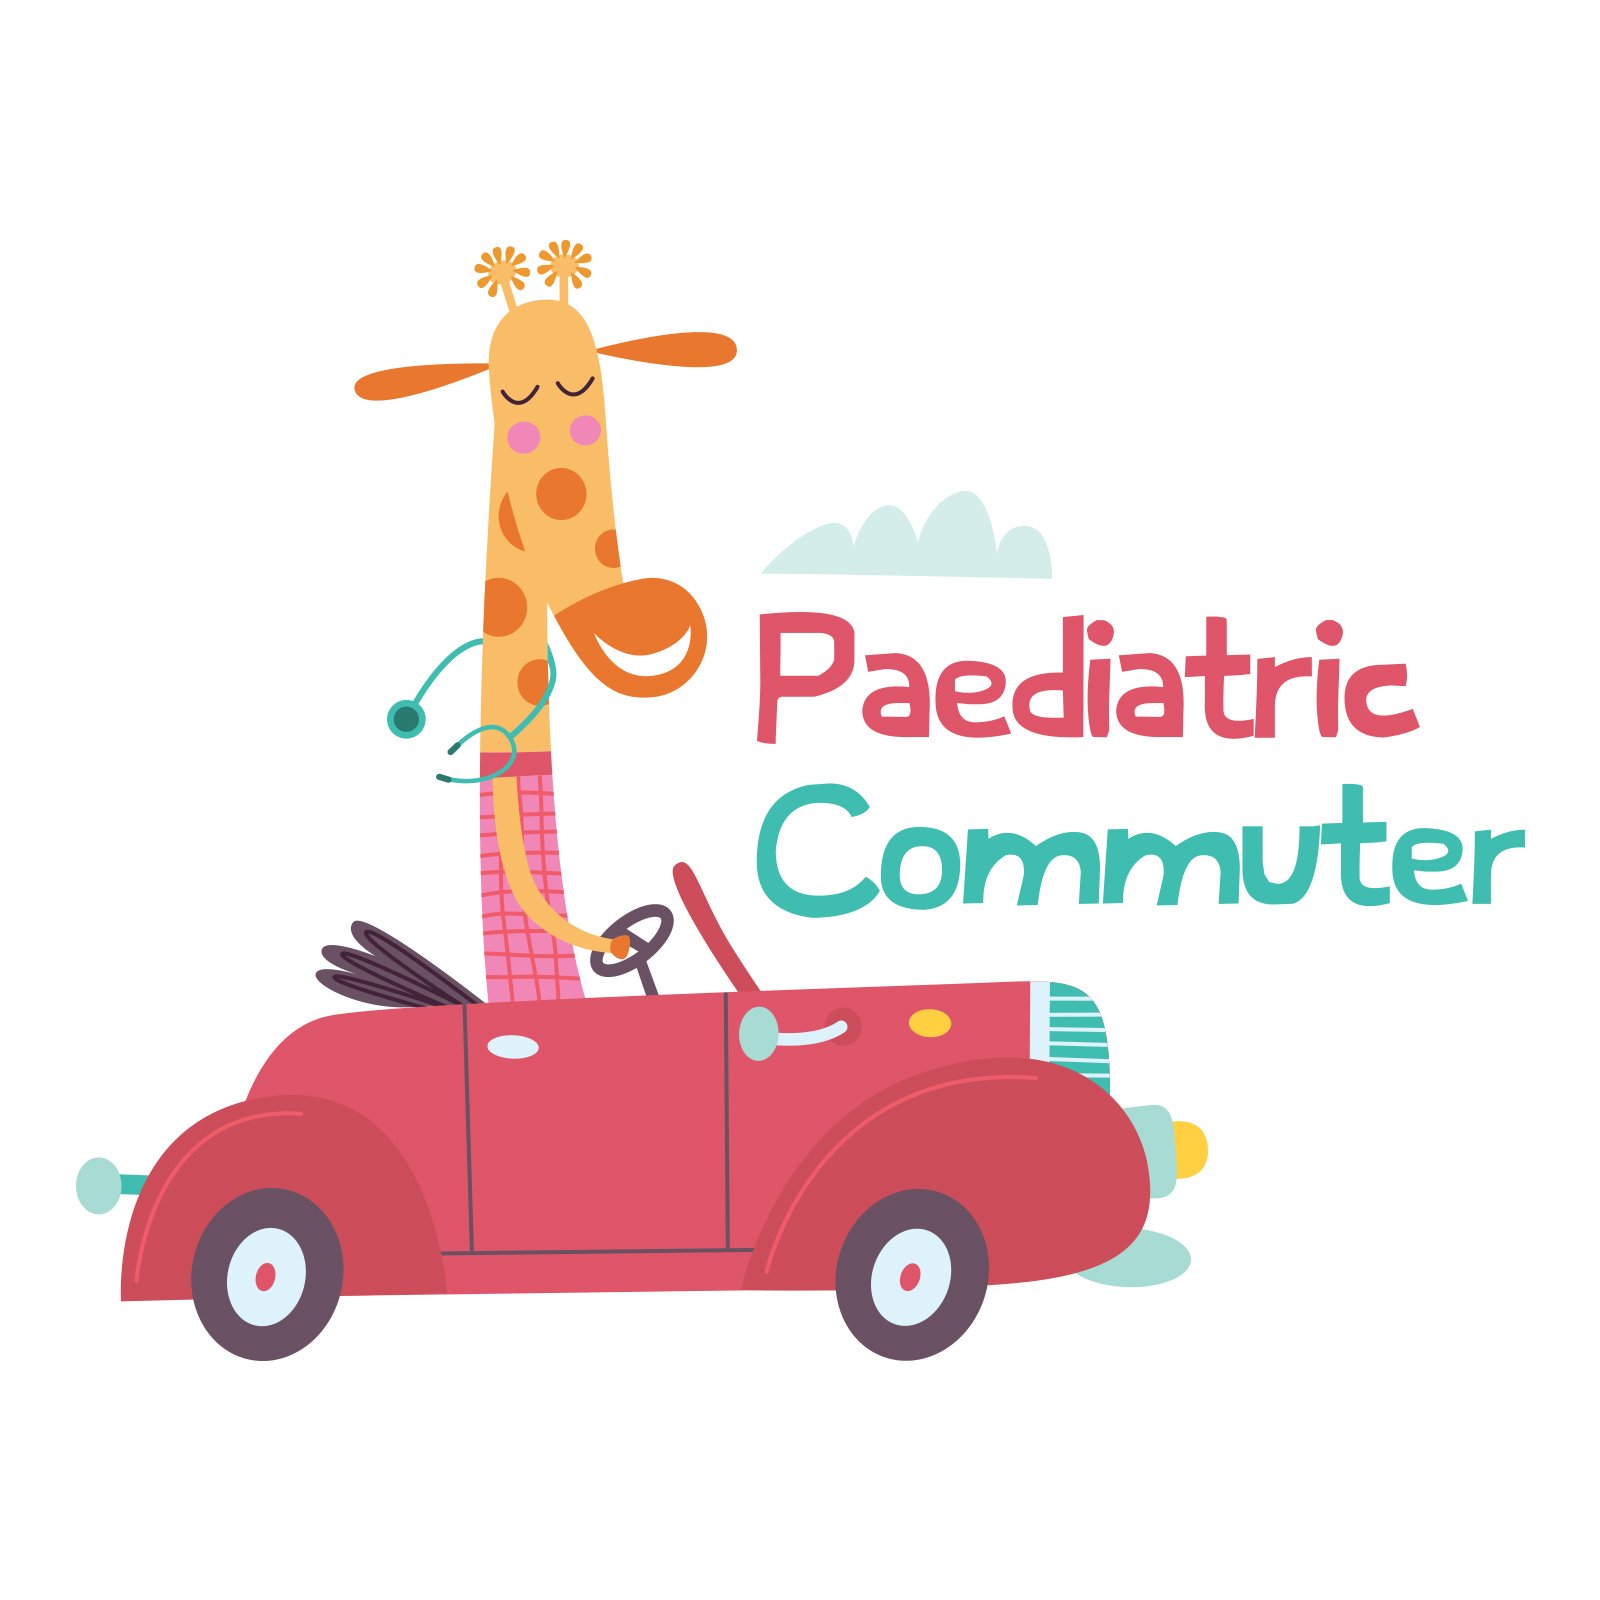 A podcast for you: the paediatric commuter. We are joining you on your daily journey from home to work and we discuss interesting paediatric related topics.